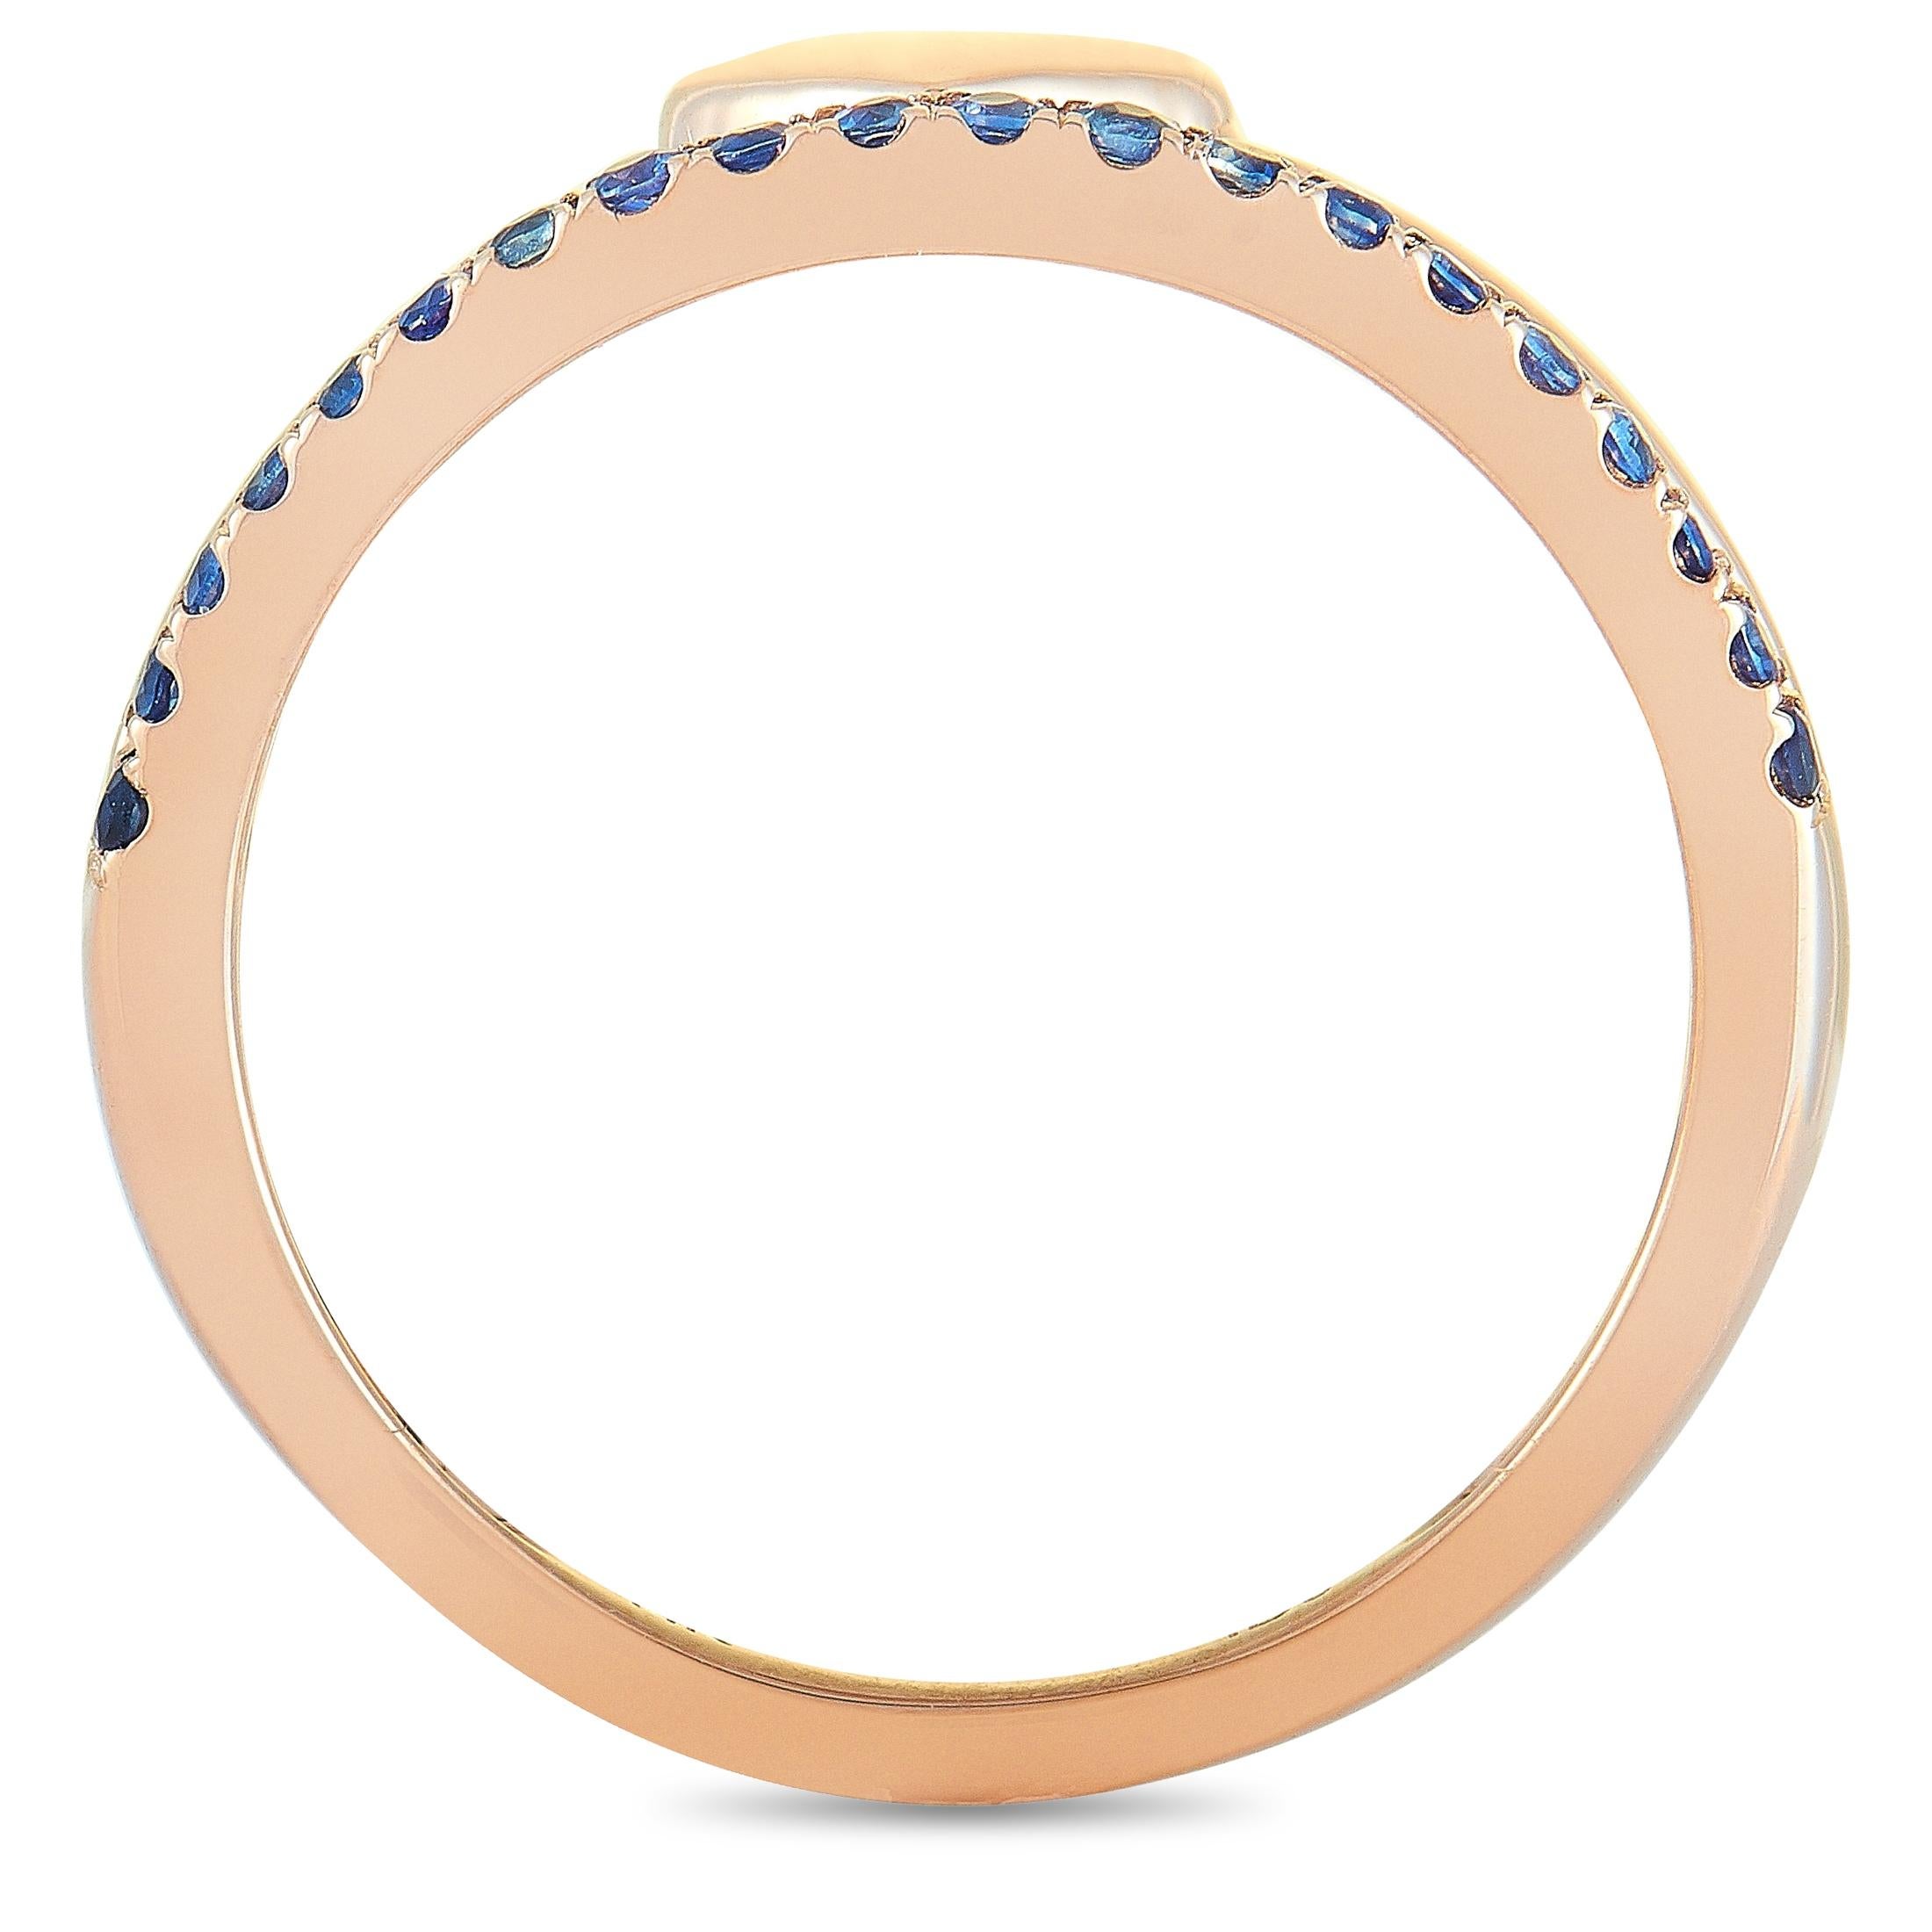 This LB Exclusive ring is made of 14K rose gold and set with sapphires that amount to 0.25 carats. The ring weighs 2.5 grams, boasting band thickness of 2 mm and top height of 2 mm, while top dimensions measure 20 by 6 mm.